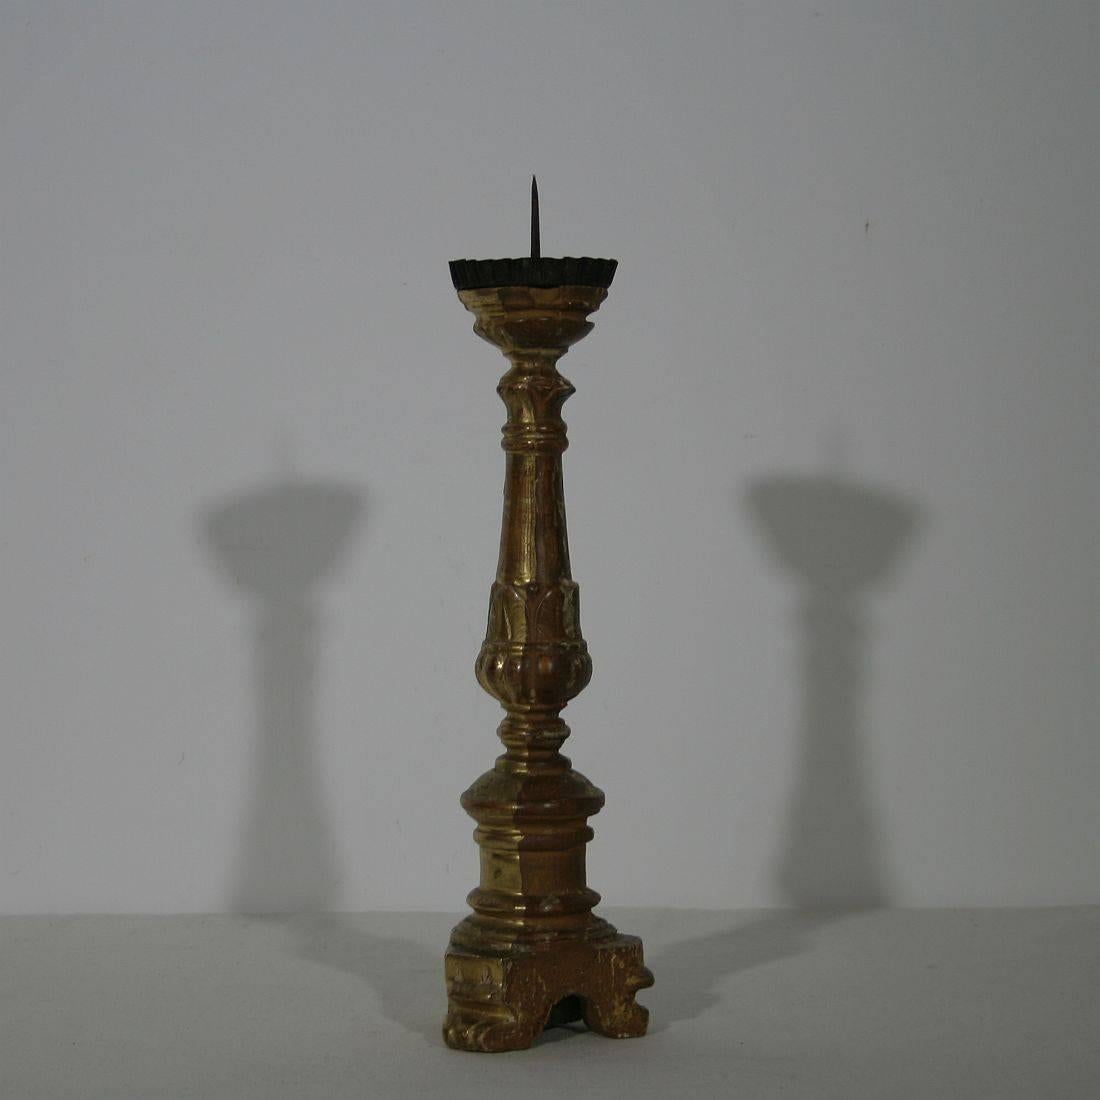 Carved Small Gilded Italian 18th Century Neoclassical Wooden Candlestick